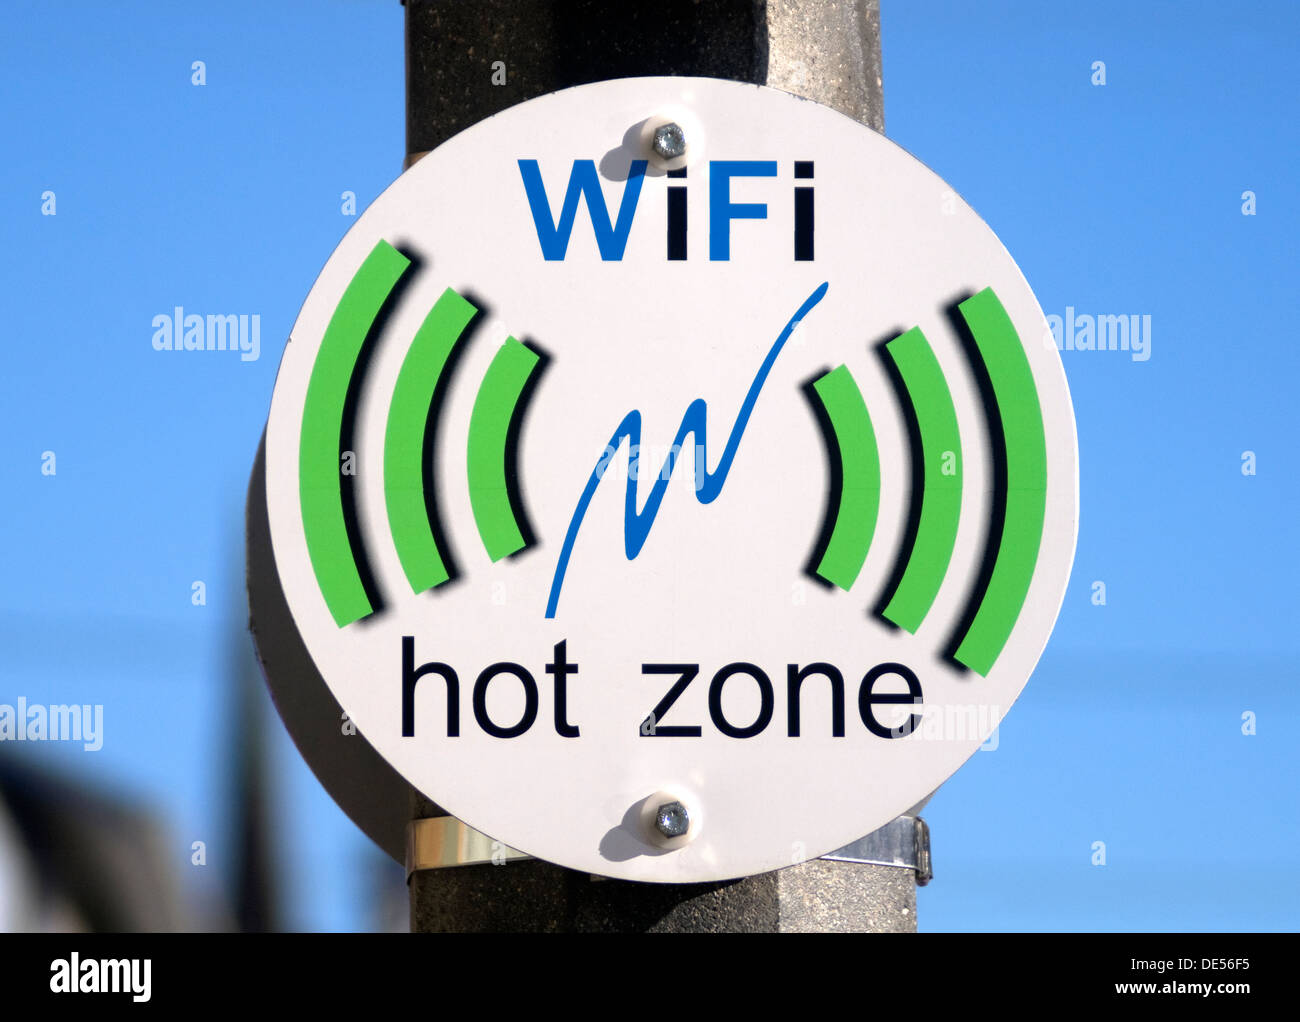 sign WiFi hot zone public access internet connection Stock Photo